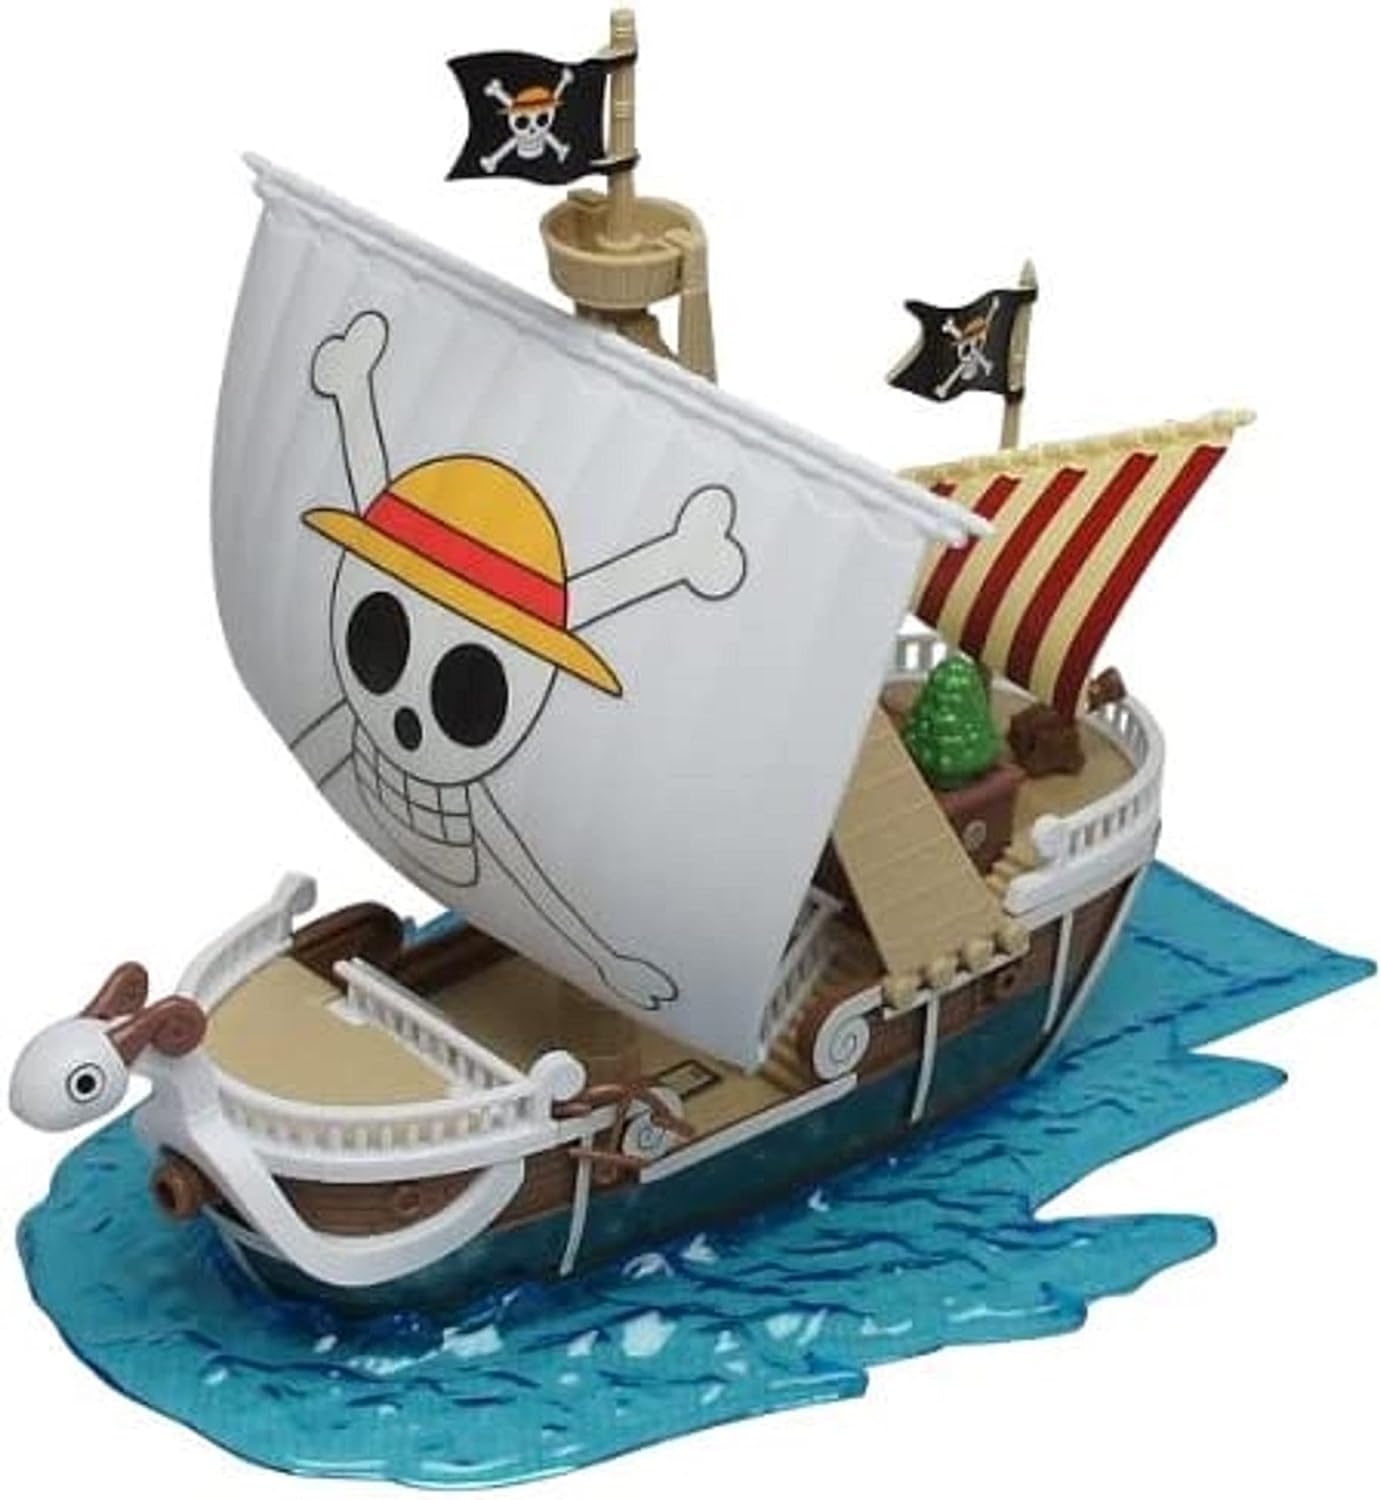 One Piece Grand Ship Collection Going Merry Ship Model Kit